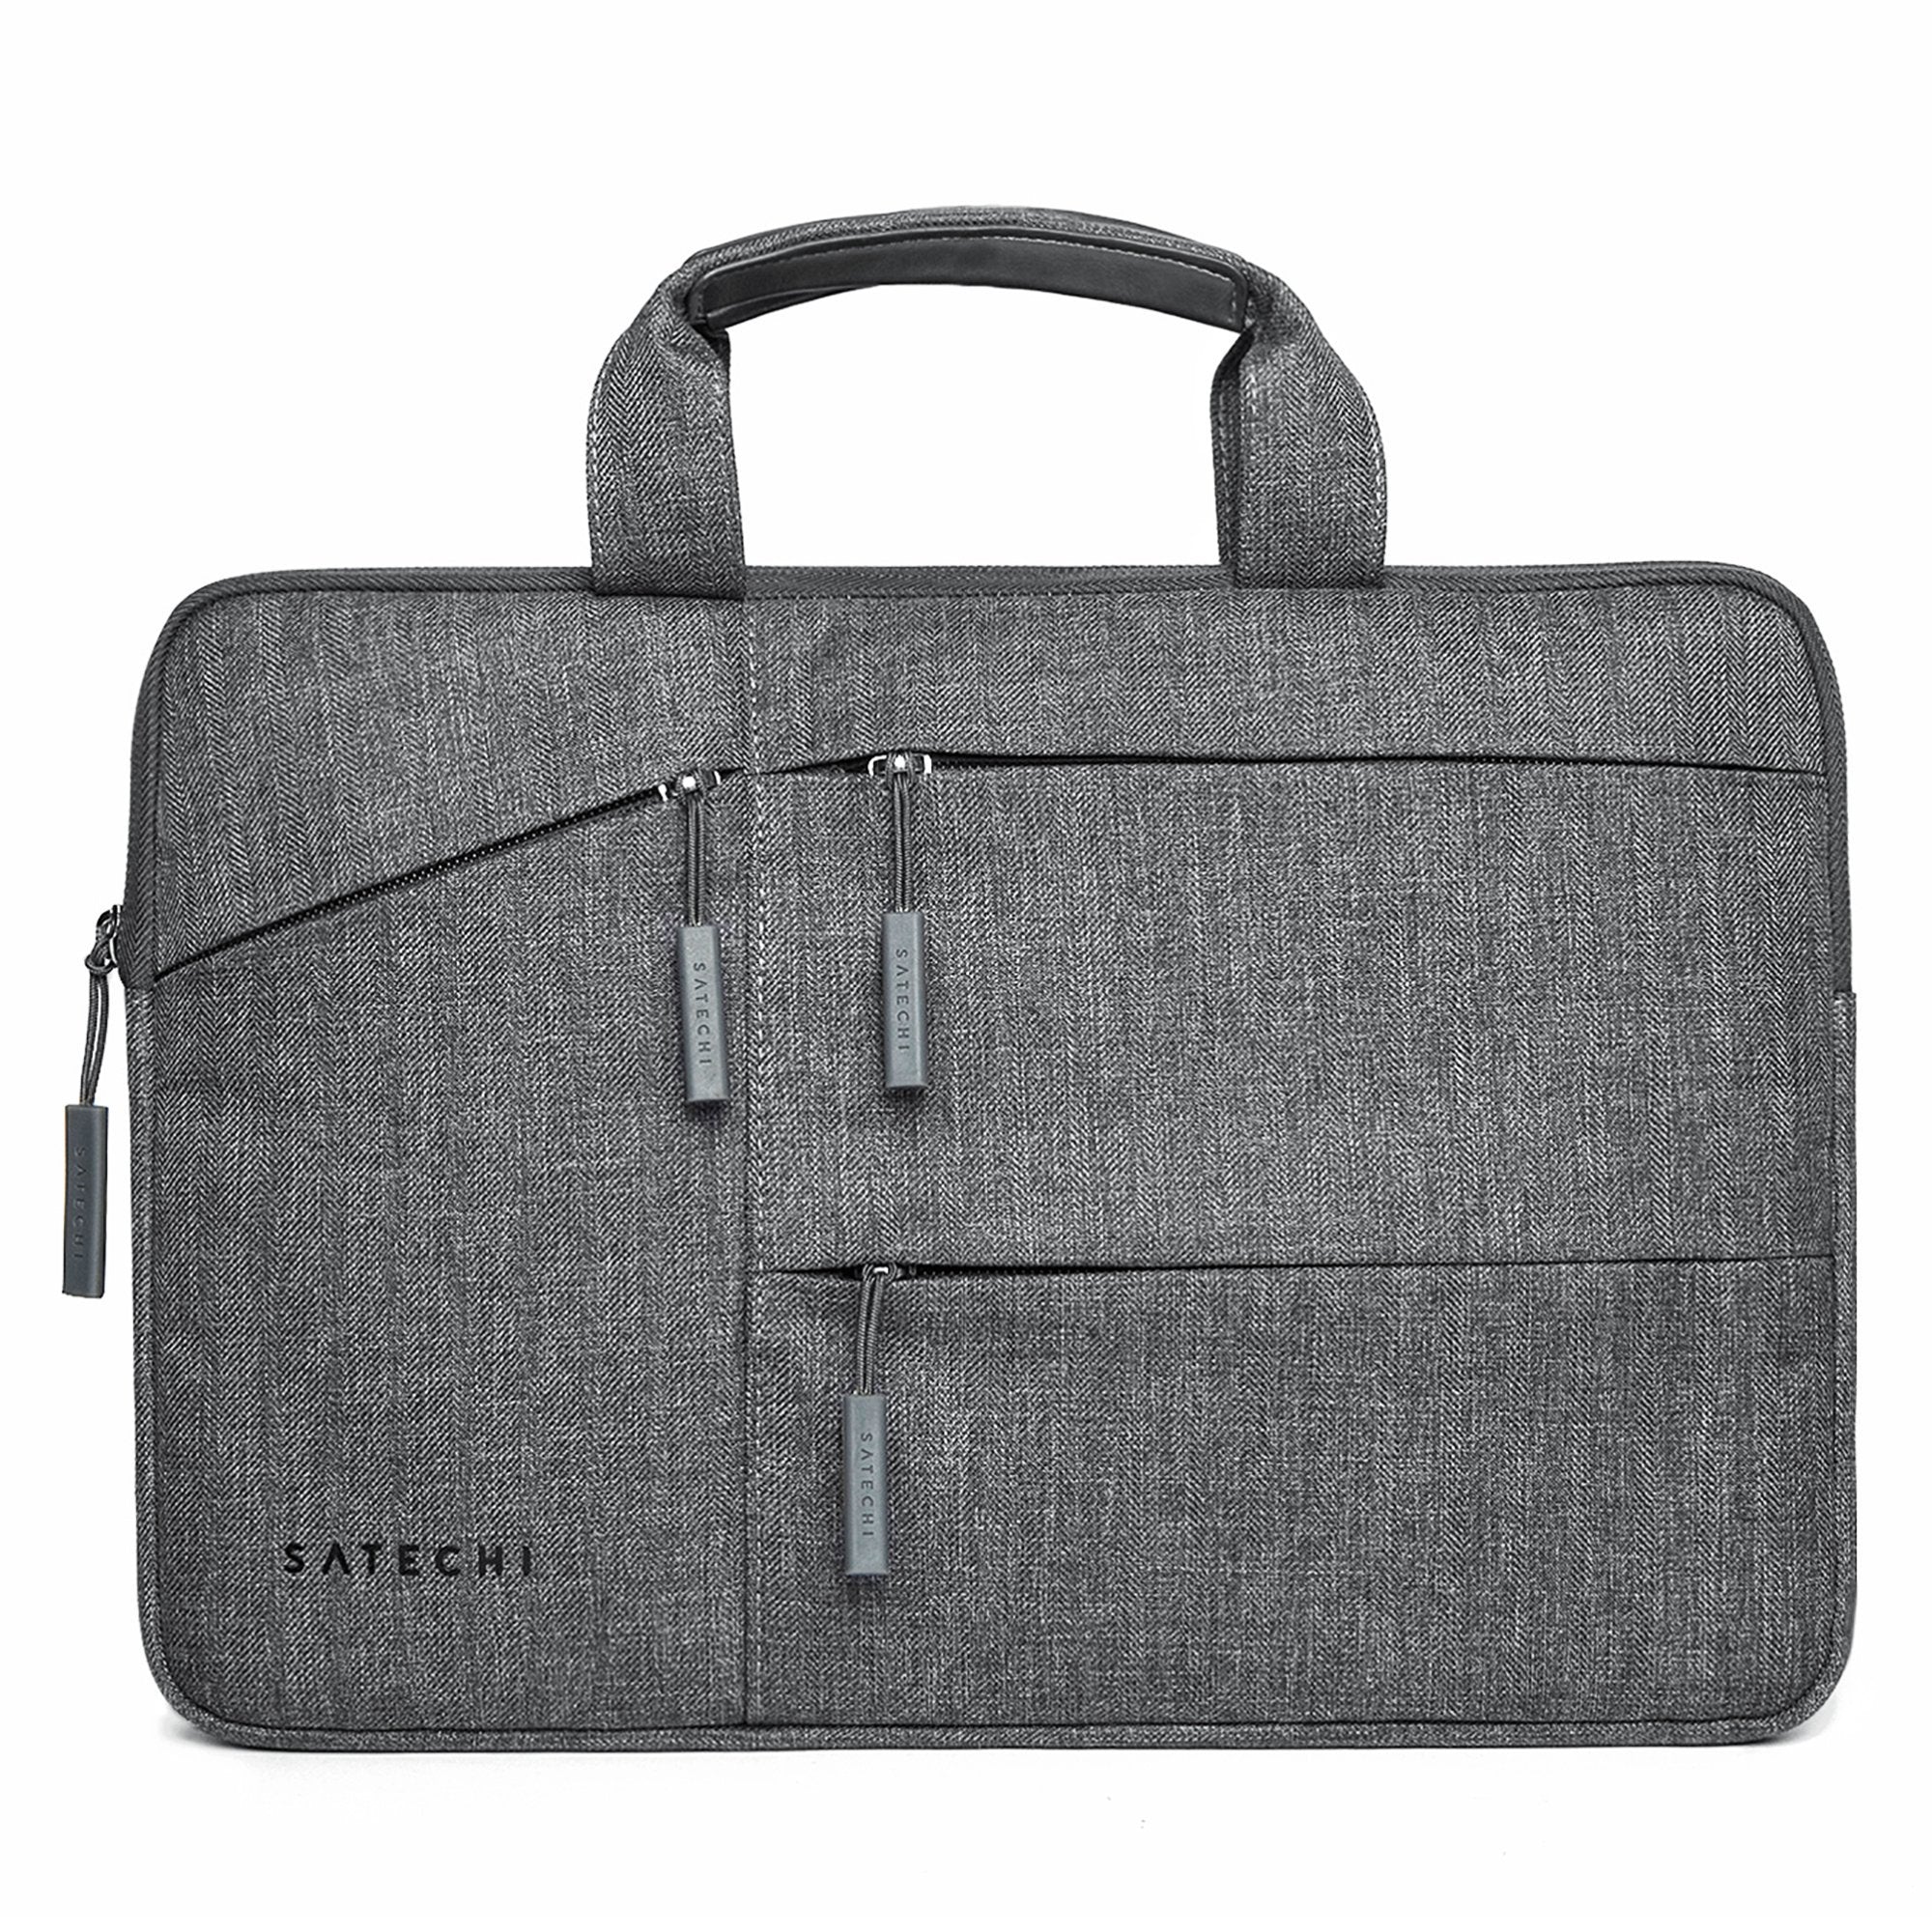 Water-Resistant Laptop Carrying Case with Pockets Case Satechi 15-Inch 